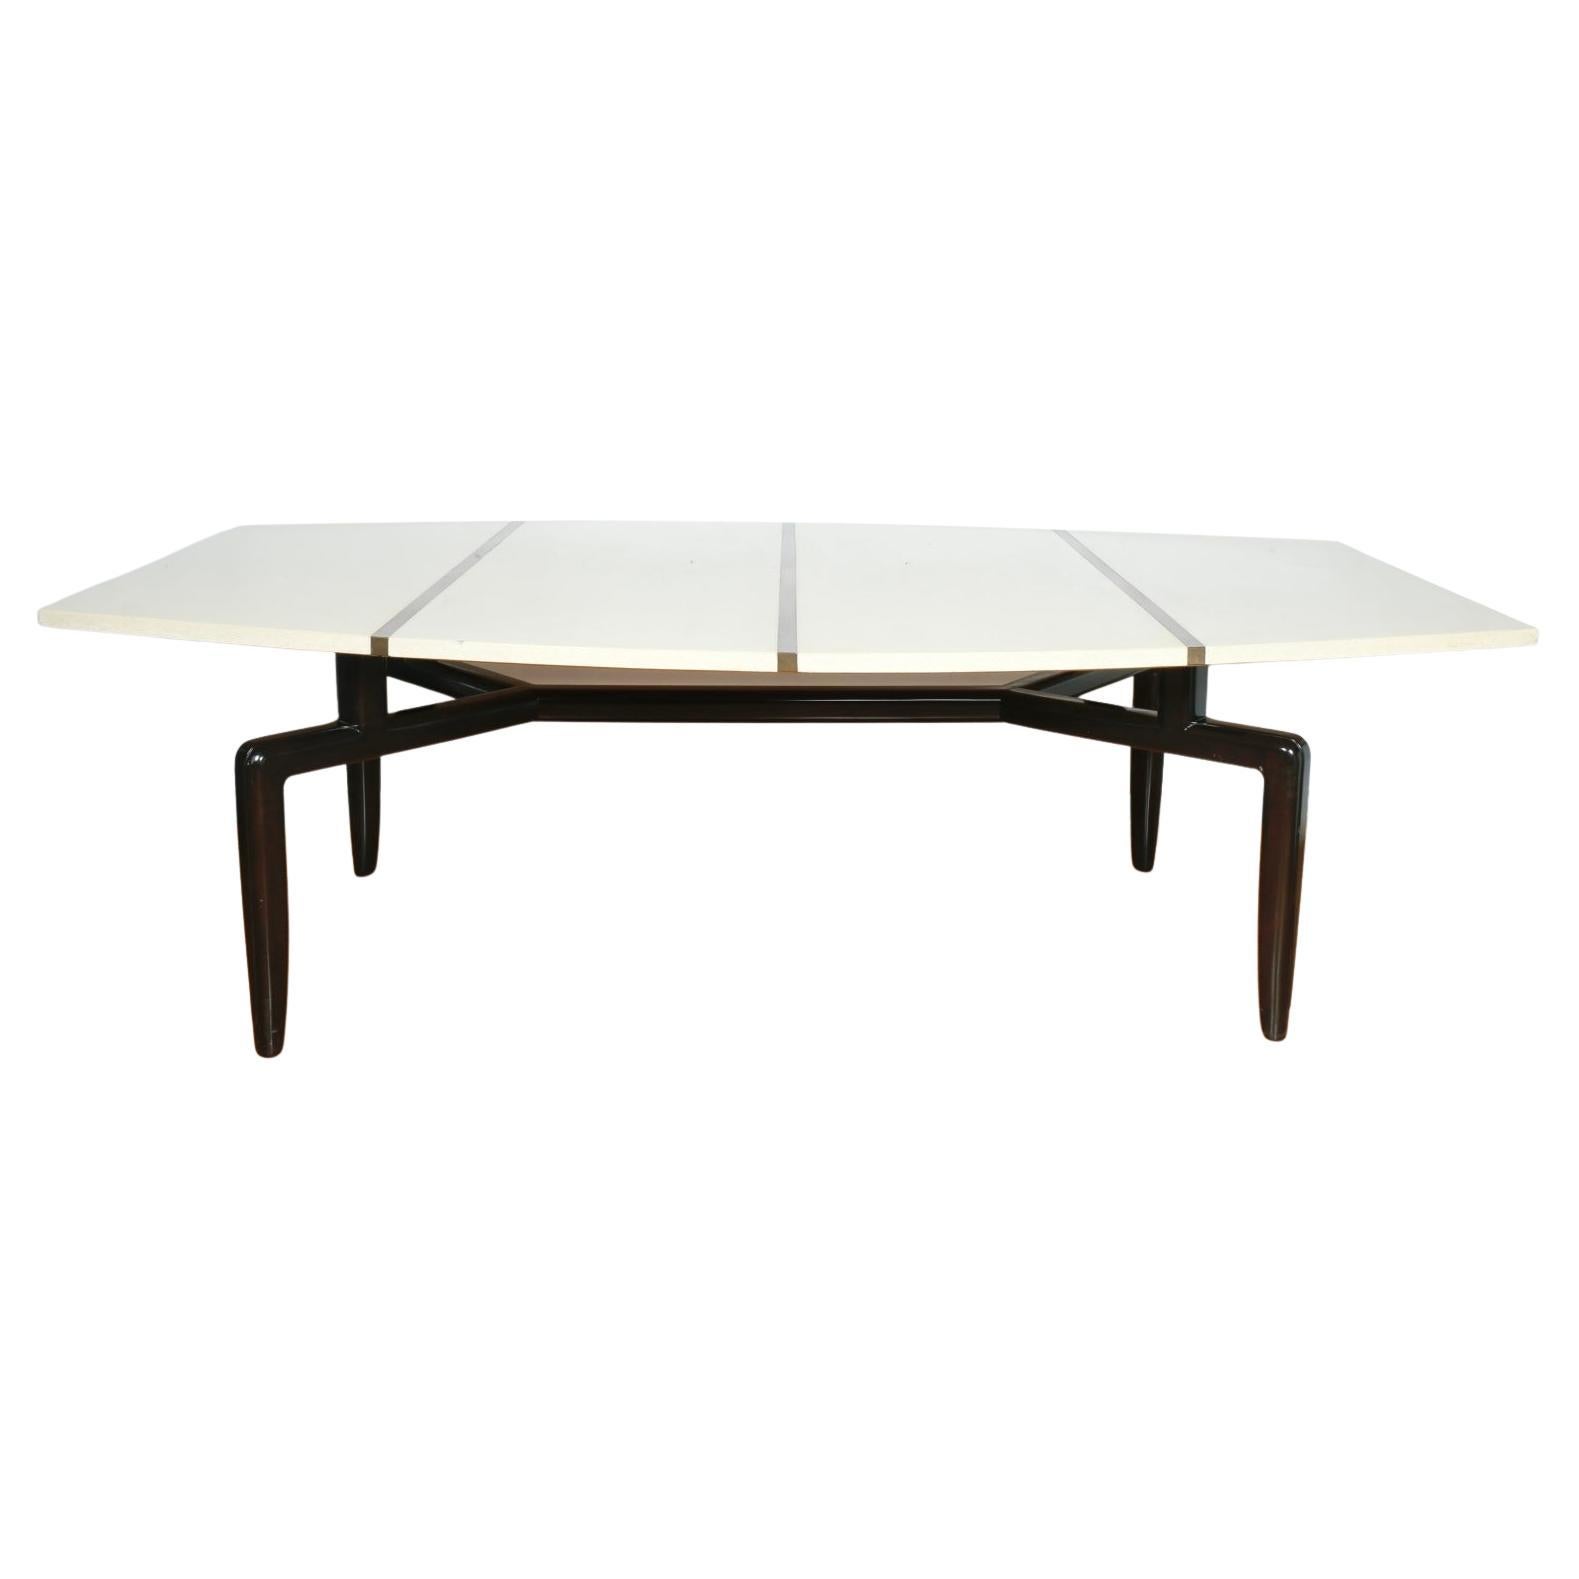 Monteverdi-Young Conference Tables